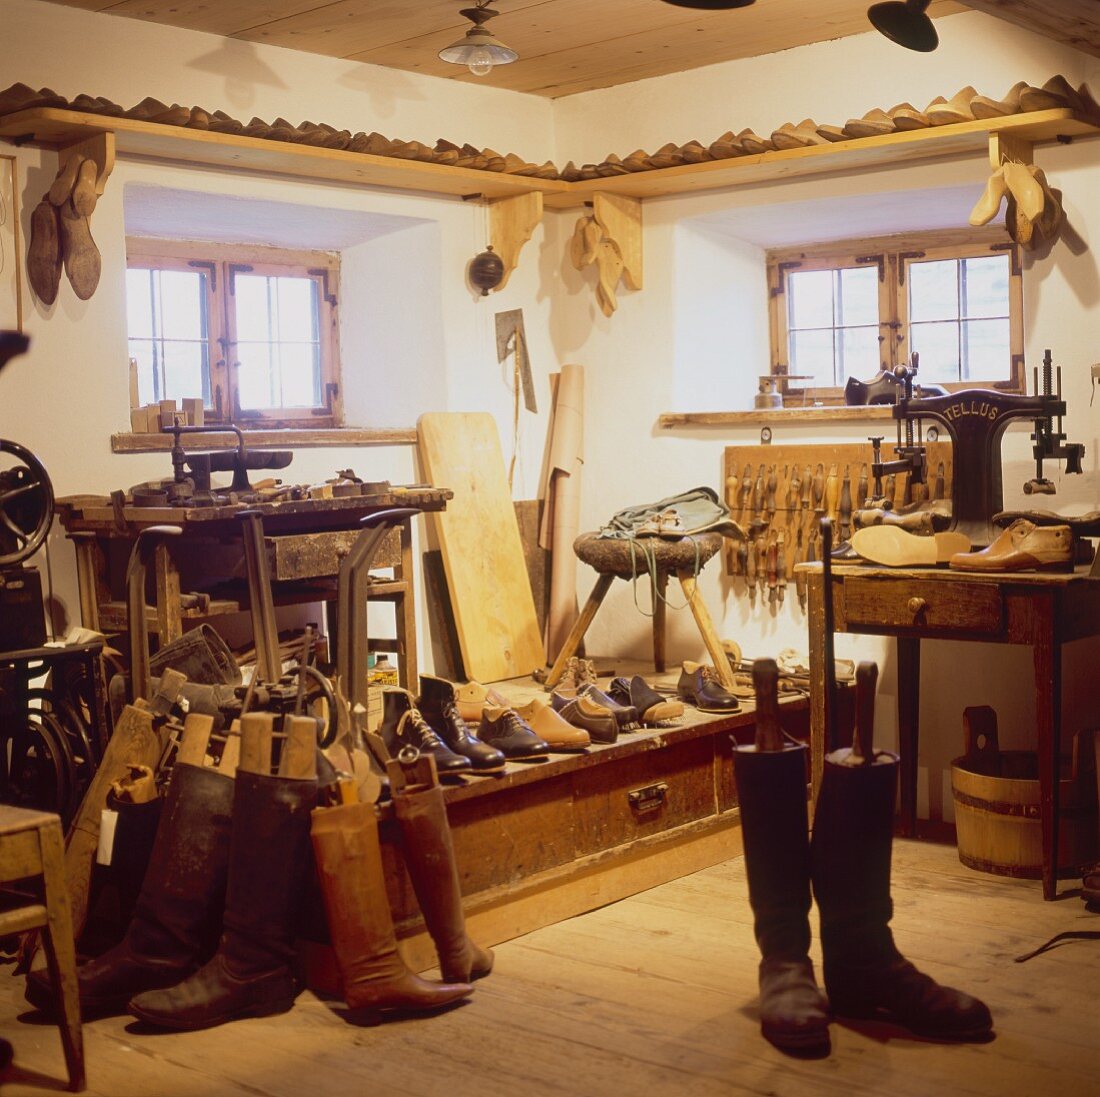 Boots and shoes in traditional-style rustic cobbler's workshop with small lattice windows